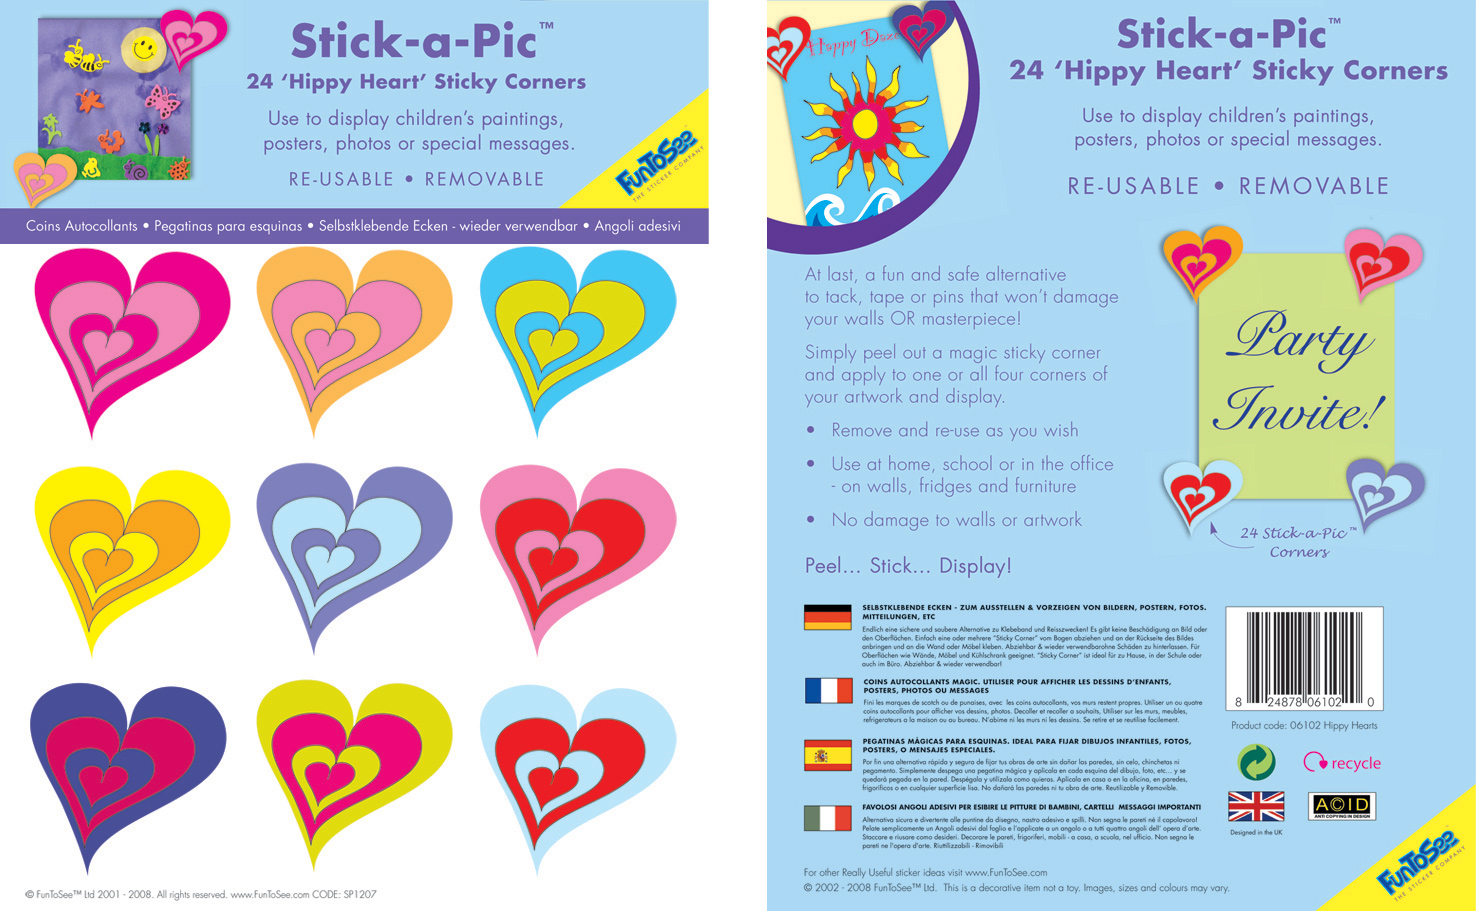 Fun To See - Stick a Pic Hippy Heart Stickers